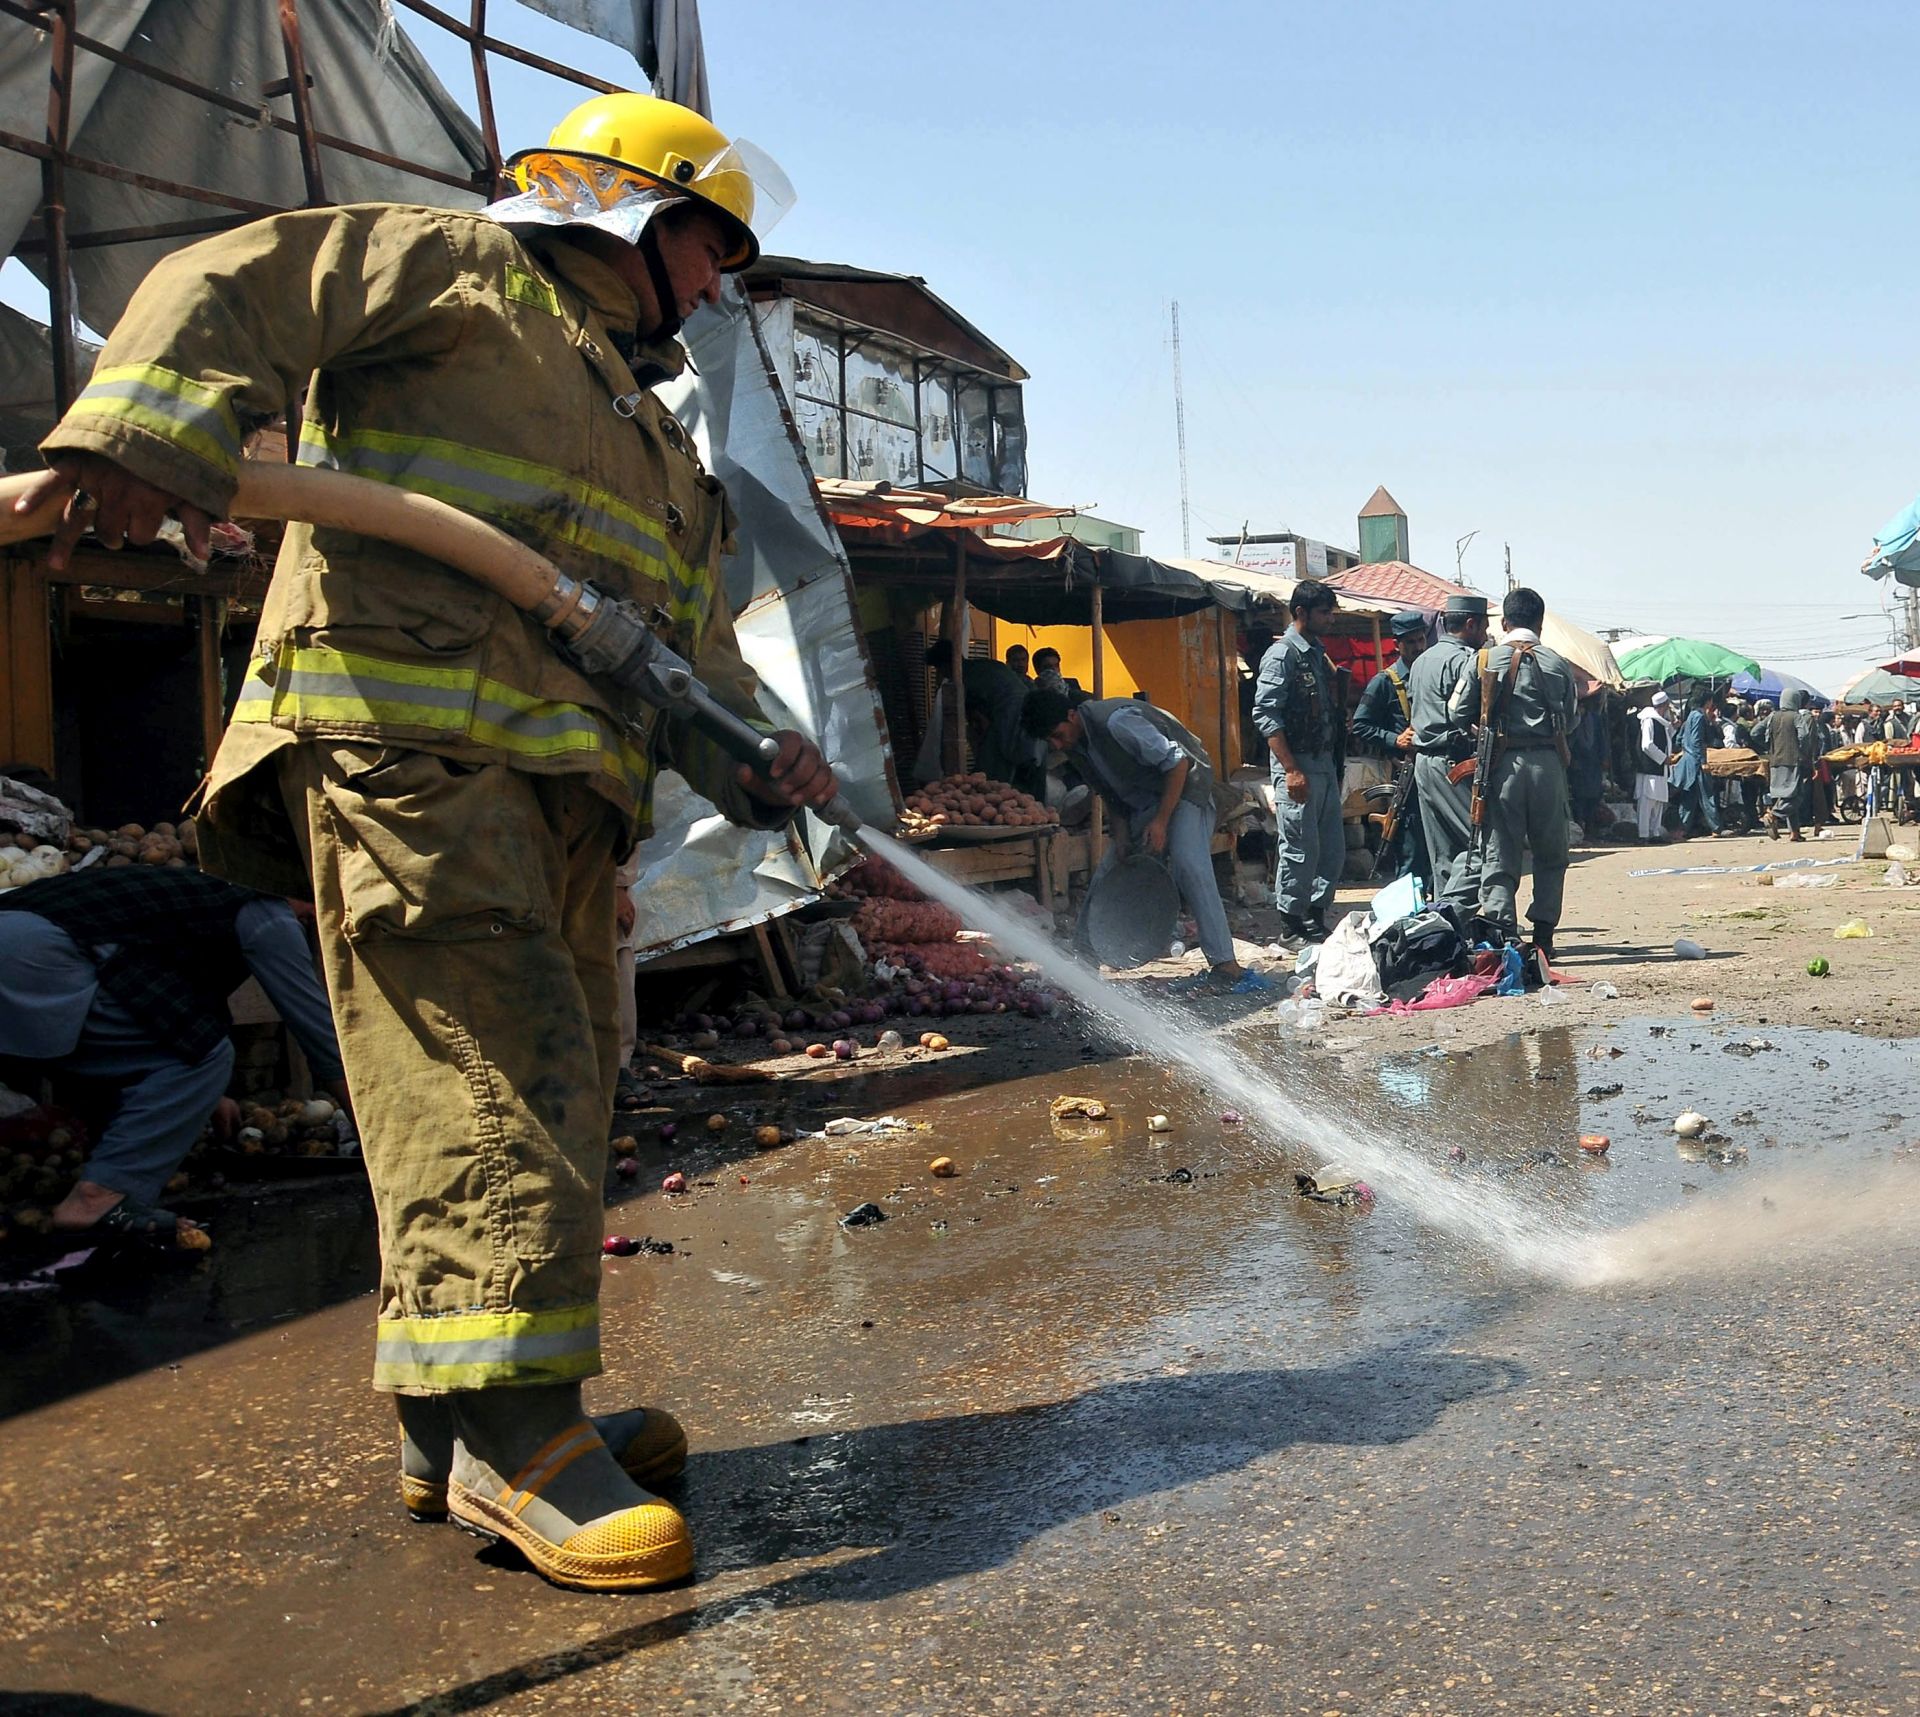 epa05467287 Members of the Afghan fire service wash down the scene of a suicide bomb blast in a busy market, in Mazar-i-Sharif, Afghanistan, 09 August 2016. According to media reports three people were killed in the bomb blast on a local market in Mazar-i-Sharif.  EPA/SAYED MUSTAFA